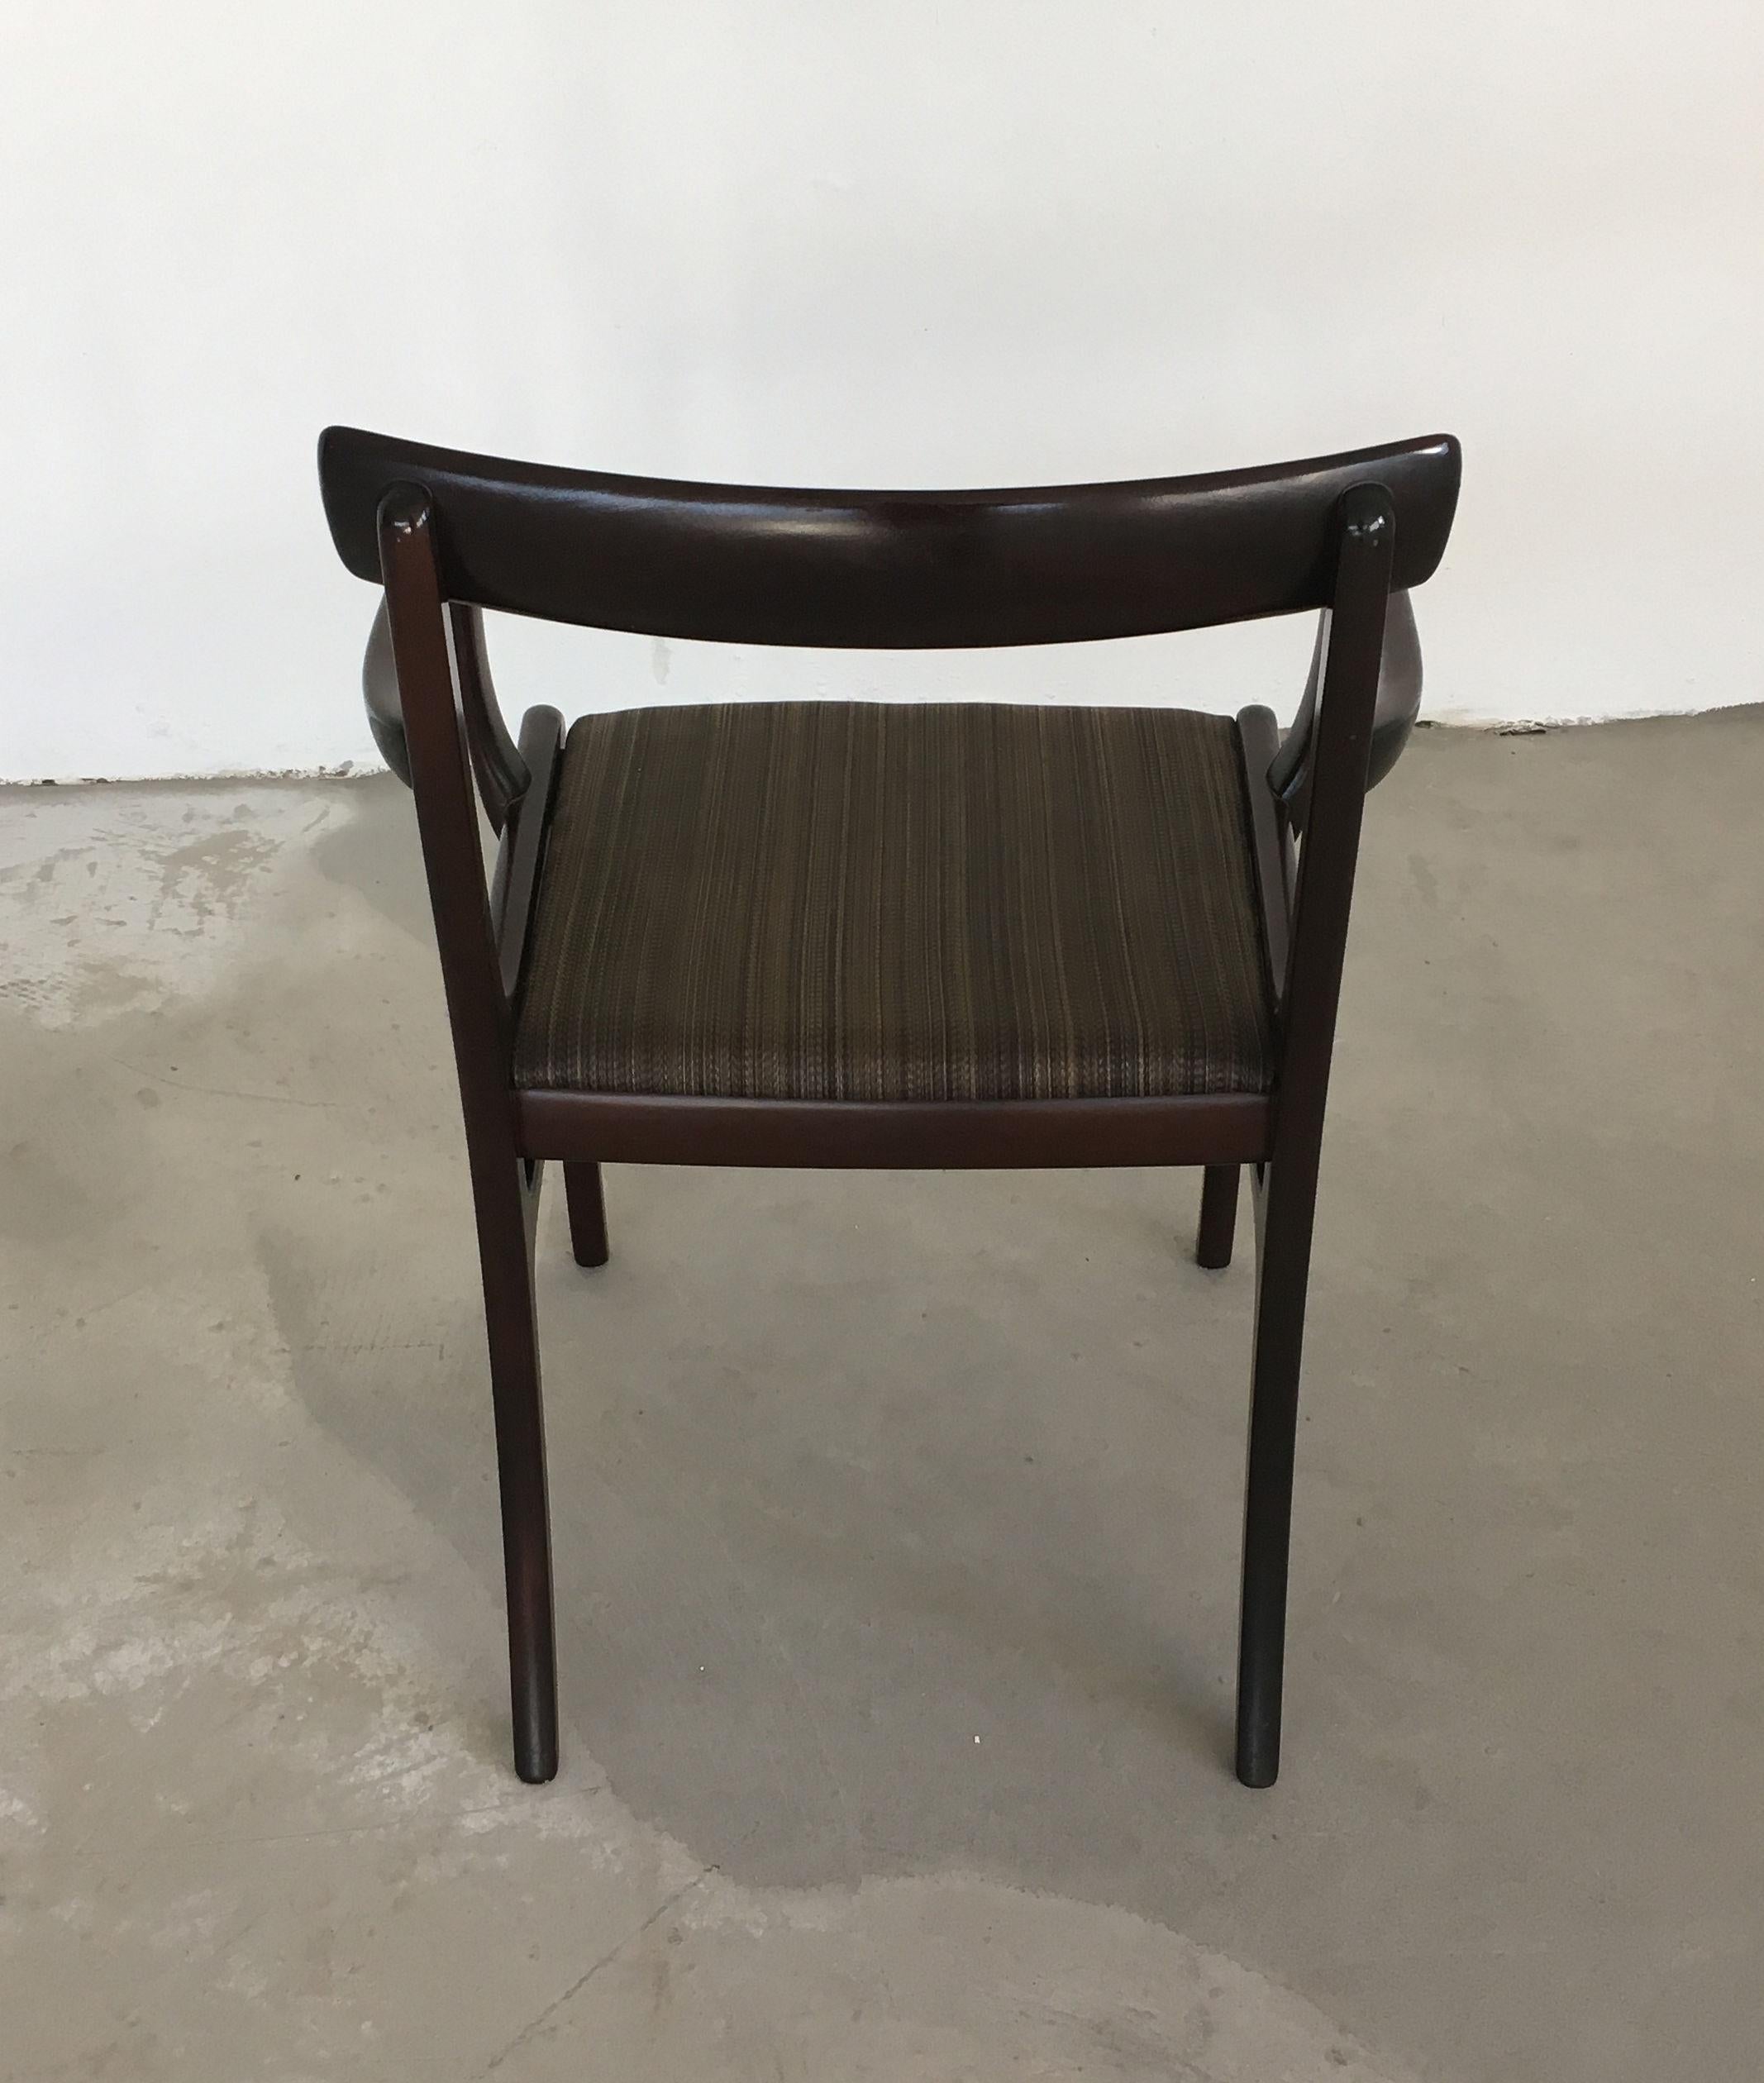 1960s Ole Wanscher Mahogany Armchair with Horsehair Upholstery In Good Condition For Sale In Knebel, DK